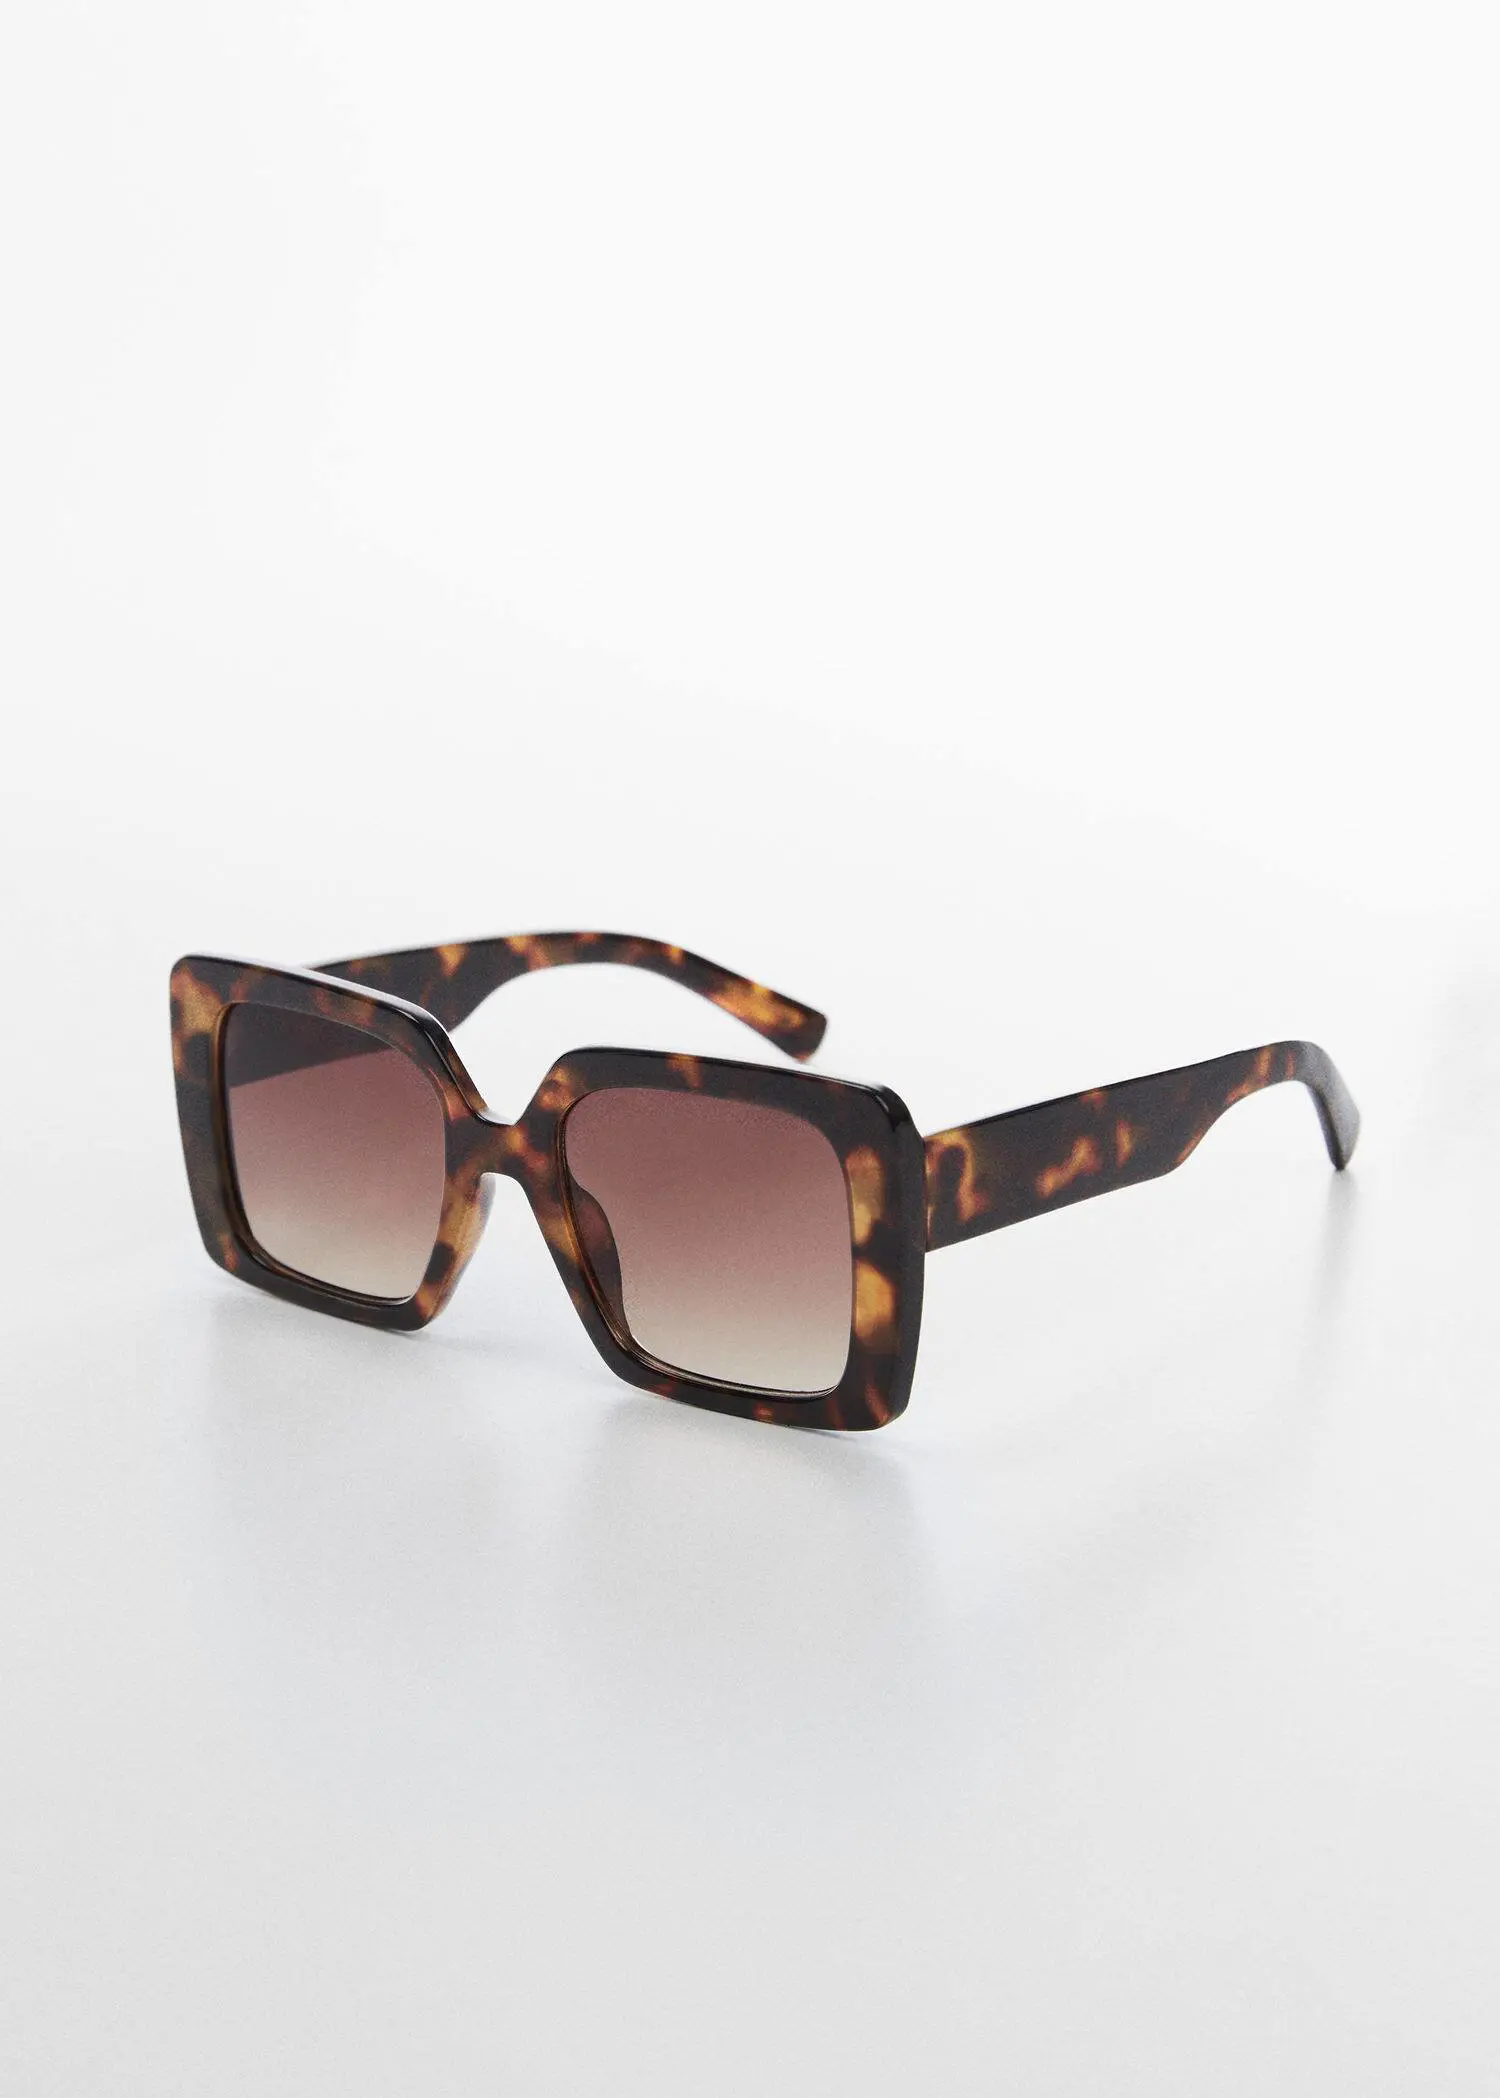 Mango Tortoiseshell square sunglasses. a pair of sunglasses sitting on top of a white table. 